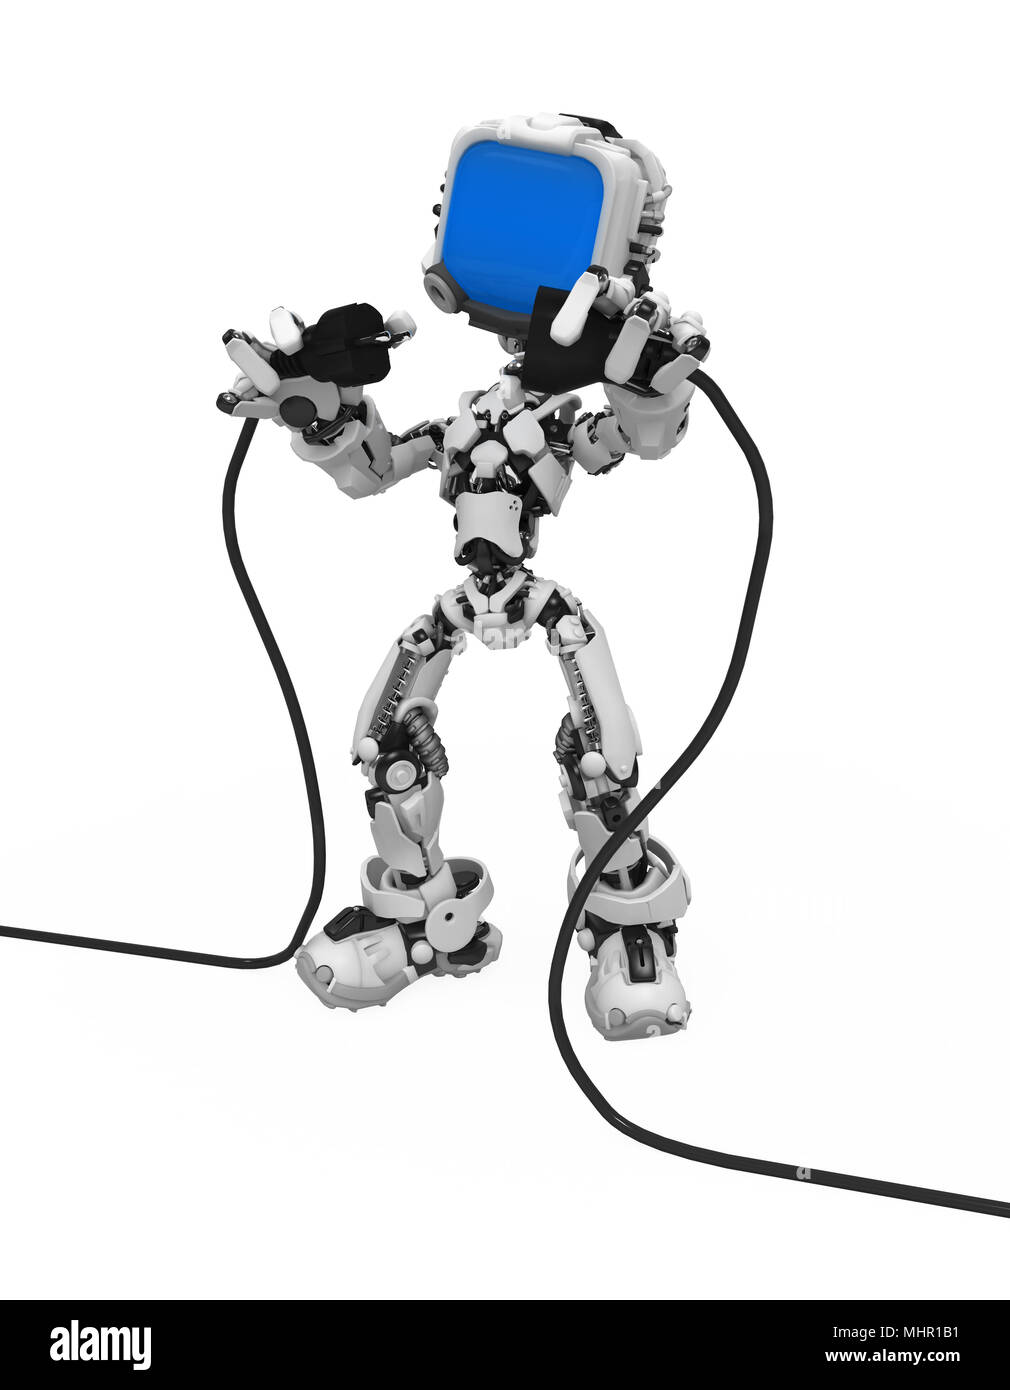 Small 3d robotic figure, over white, isolated Stock Photo